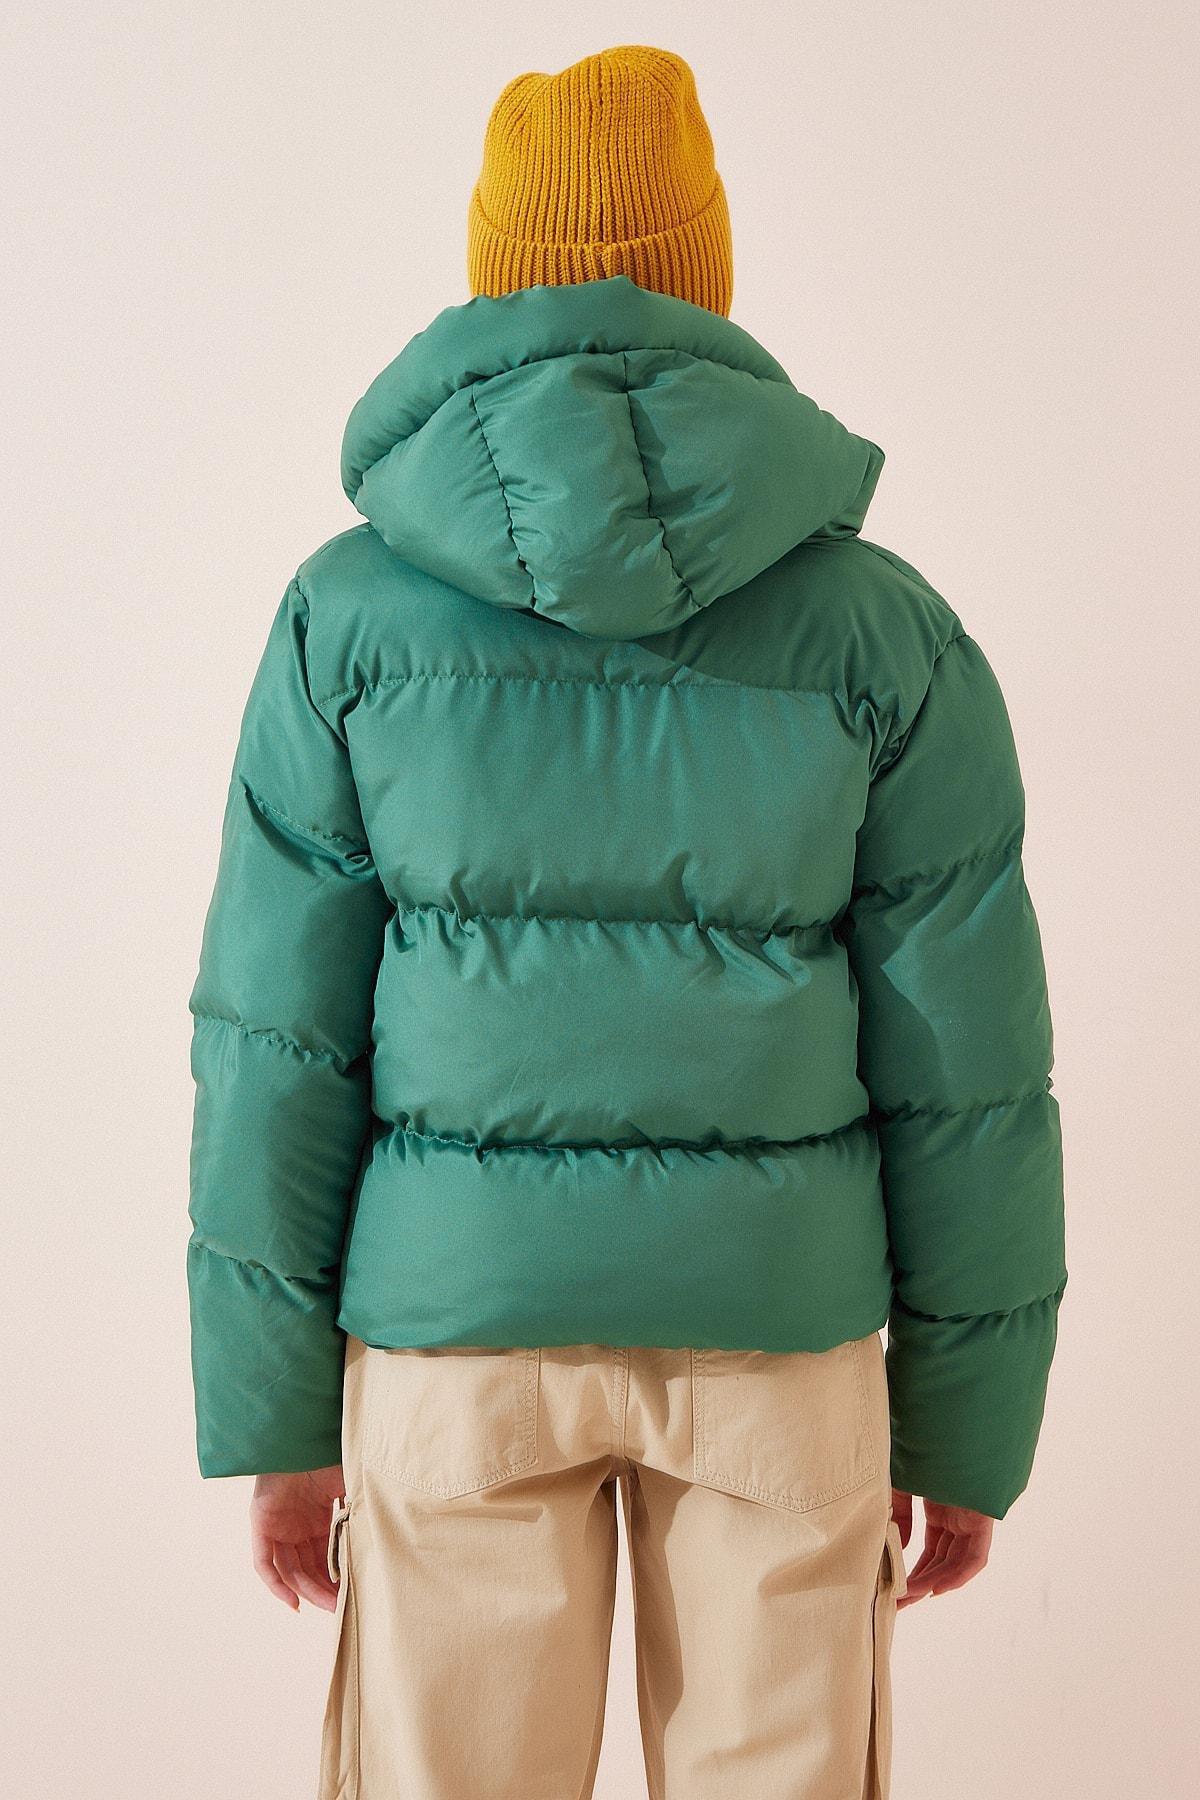 Happiness Istanbul - Green Hooded Inflatable Coat